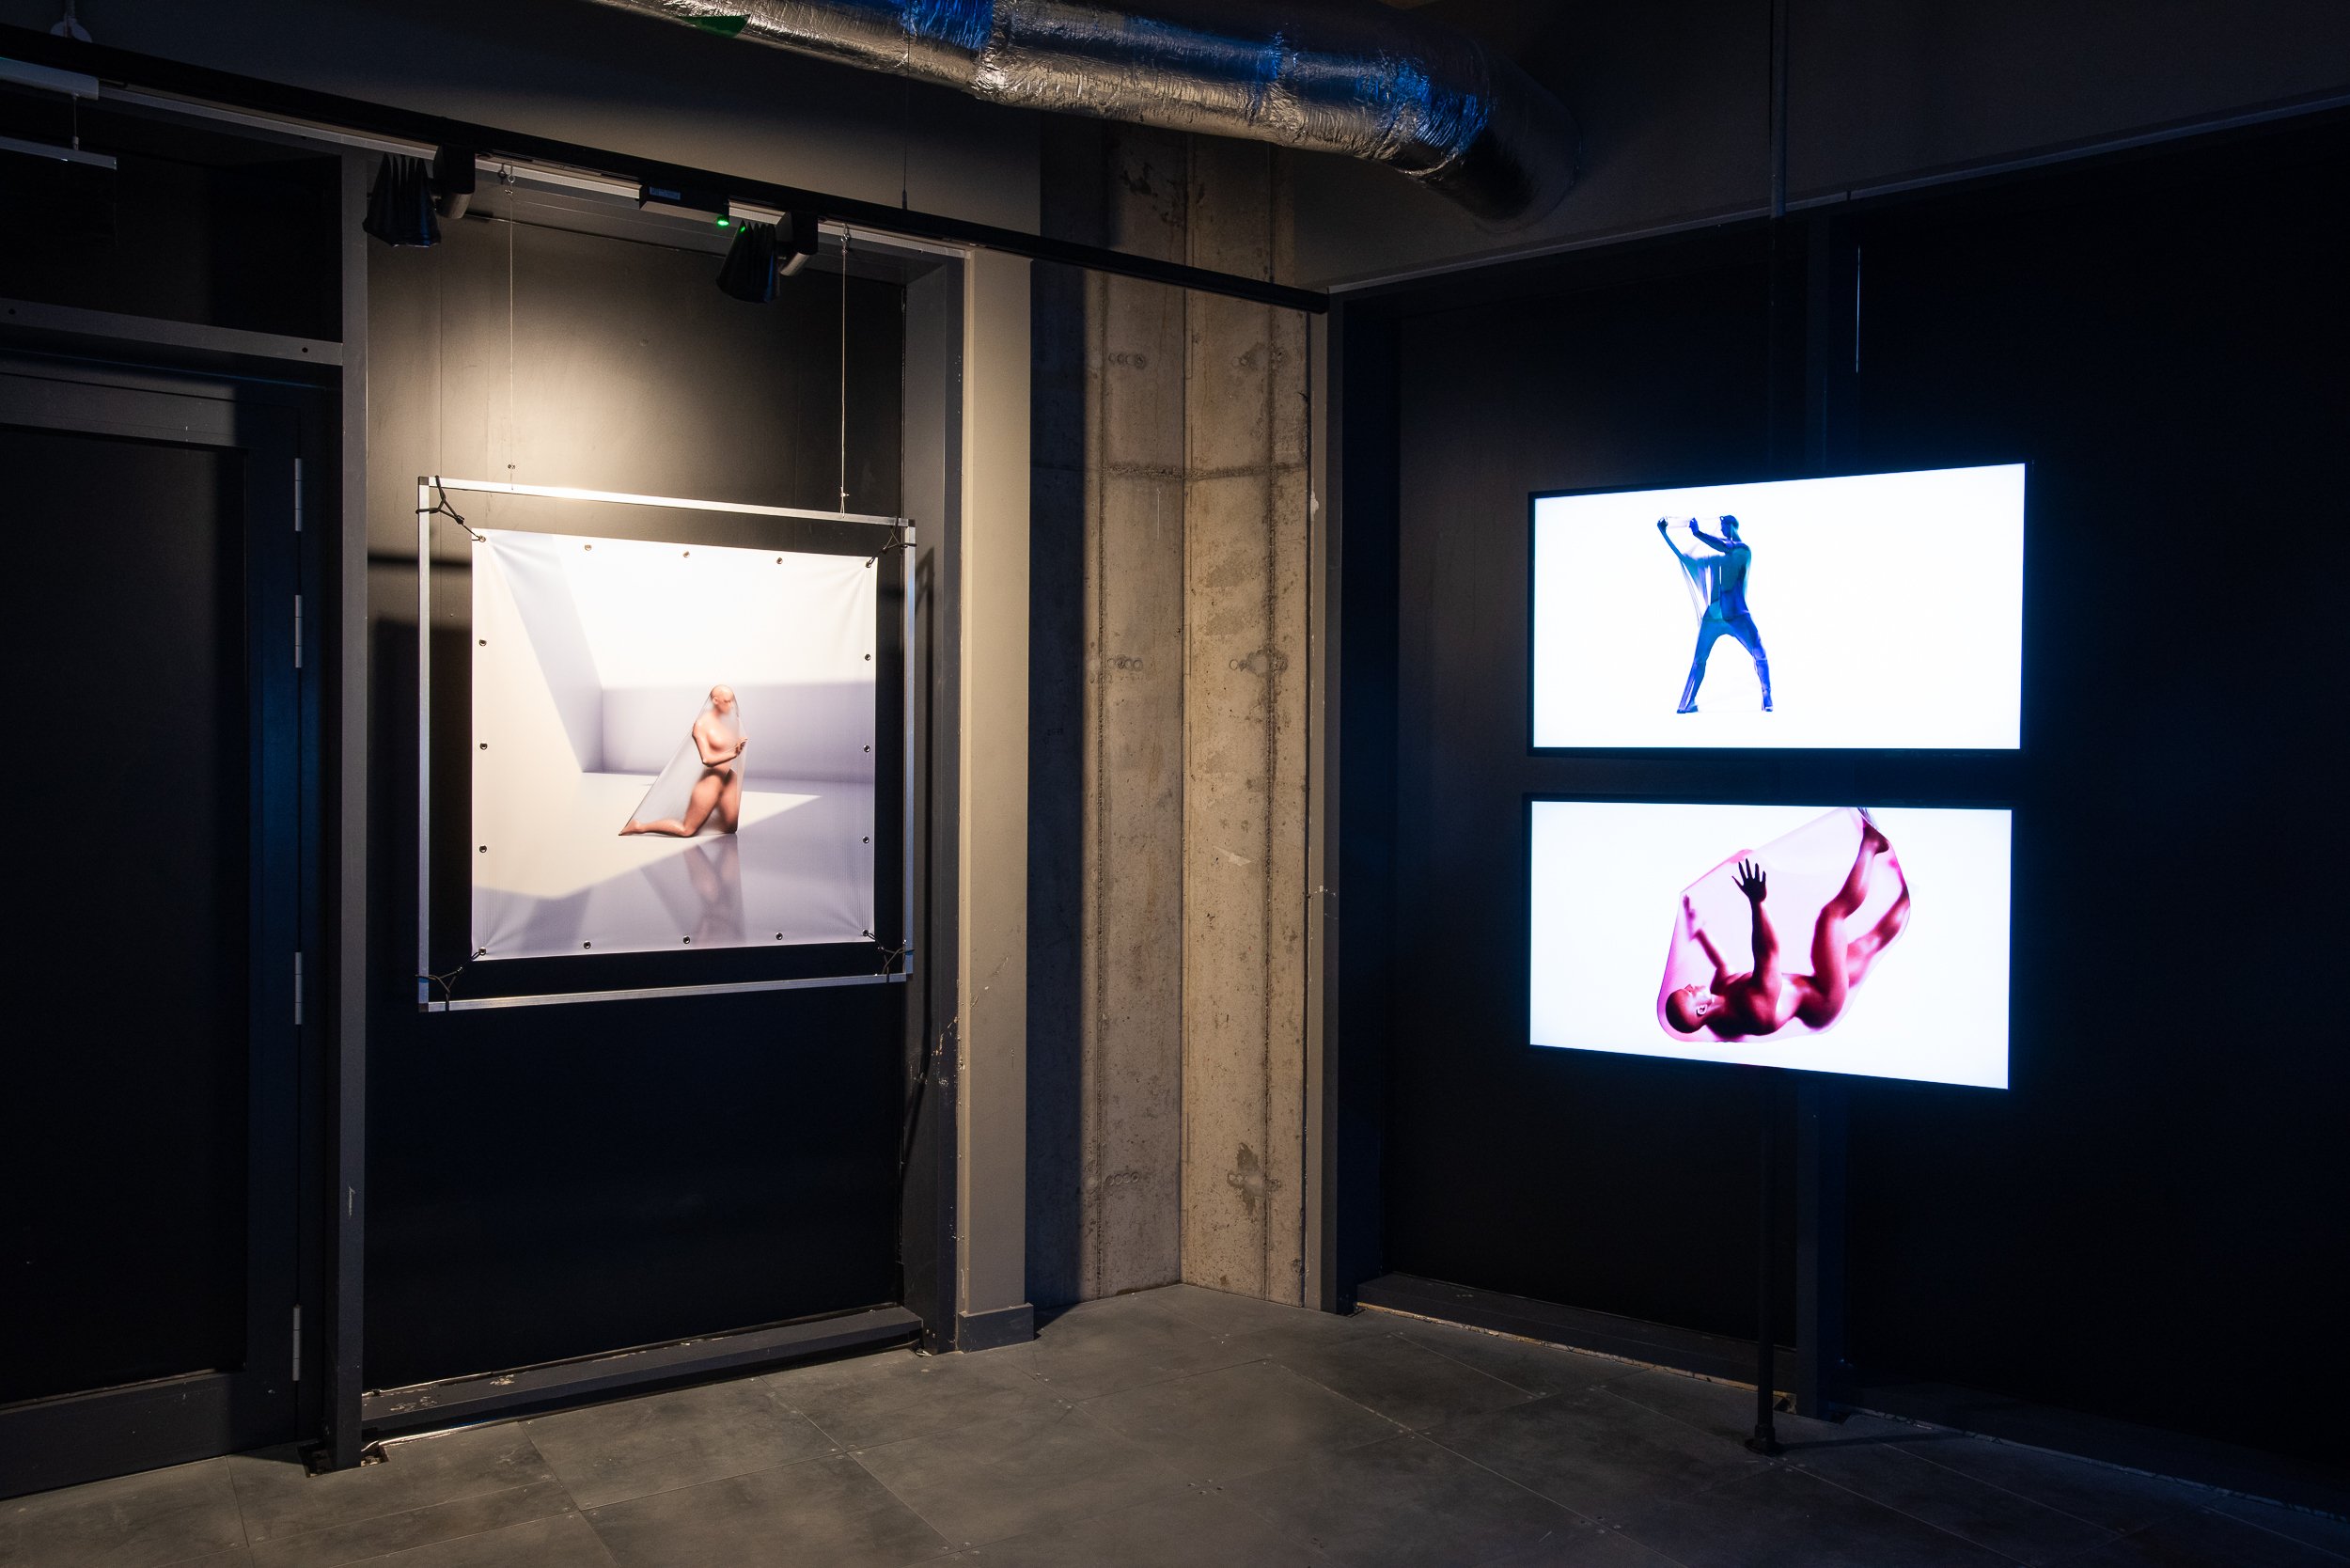 Scumboy (Oliver Hunter Pohorille), 'no, no, no', 'I can't' + 'yeah okay' (2020). Installation view, POWERPLAY, arebyte Gallery 2020. Commissioned by arebyte. Photo: Max Colson. (Copy)